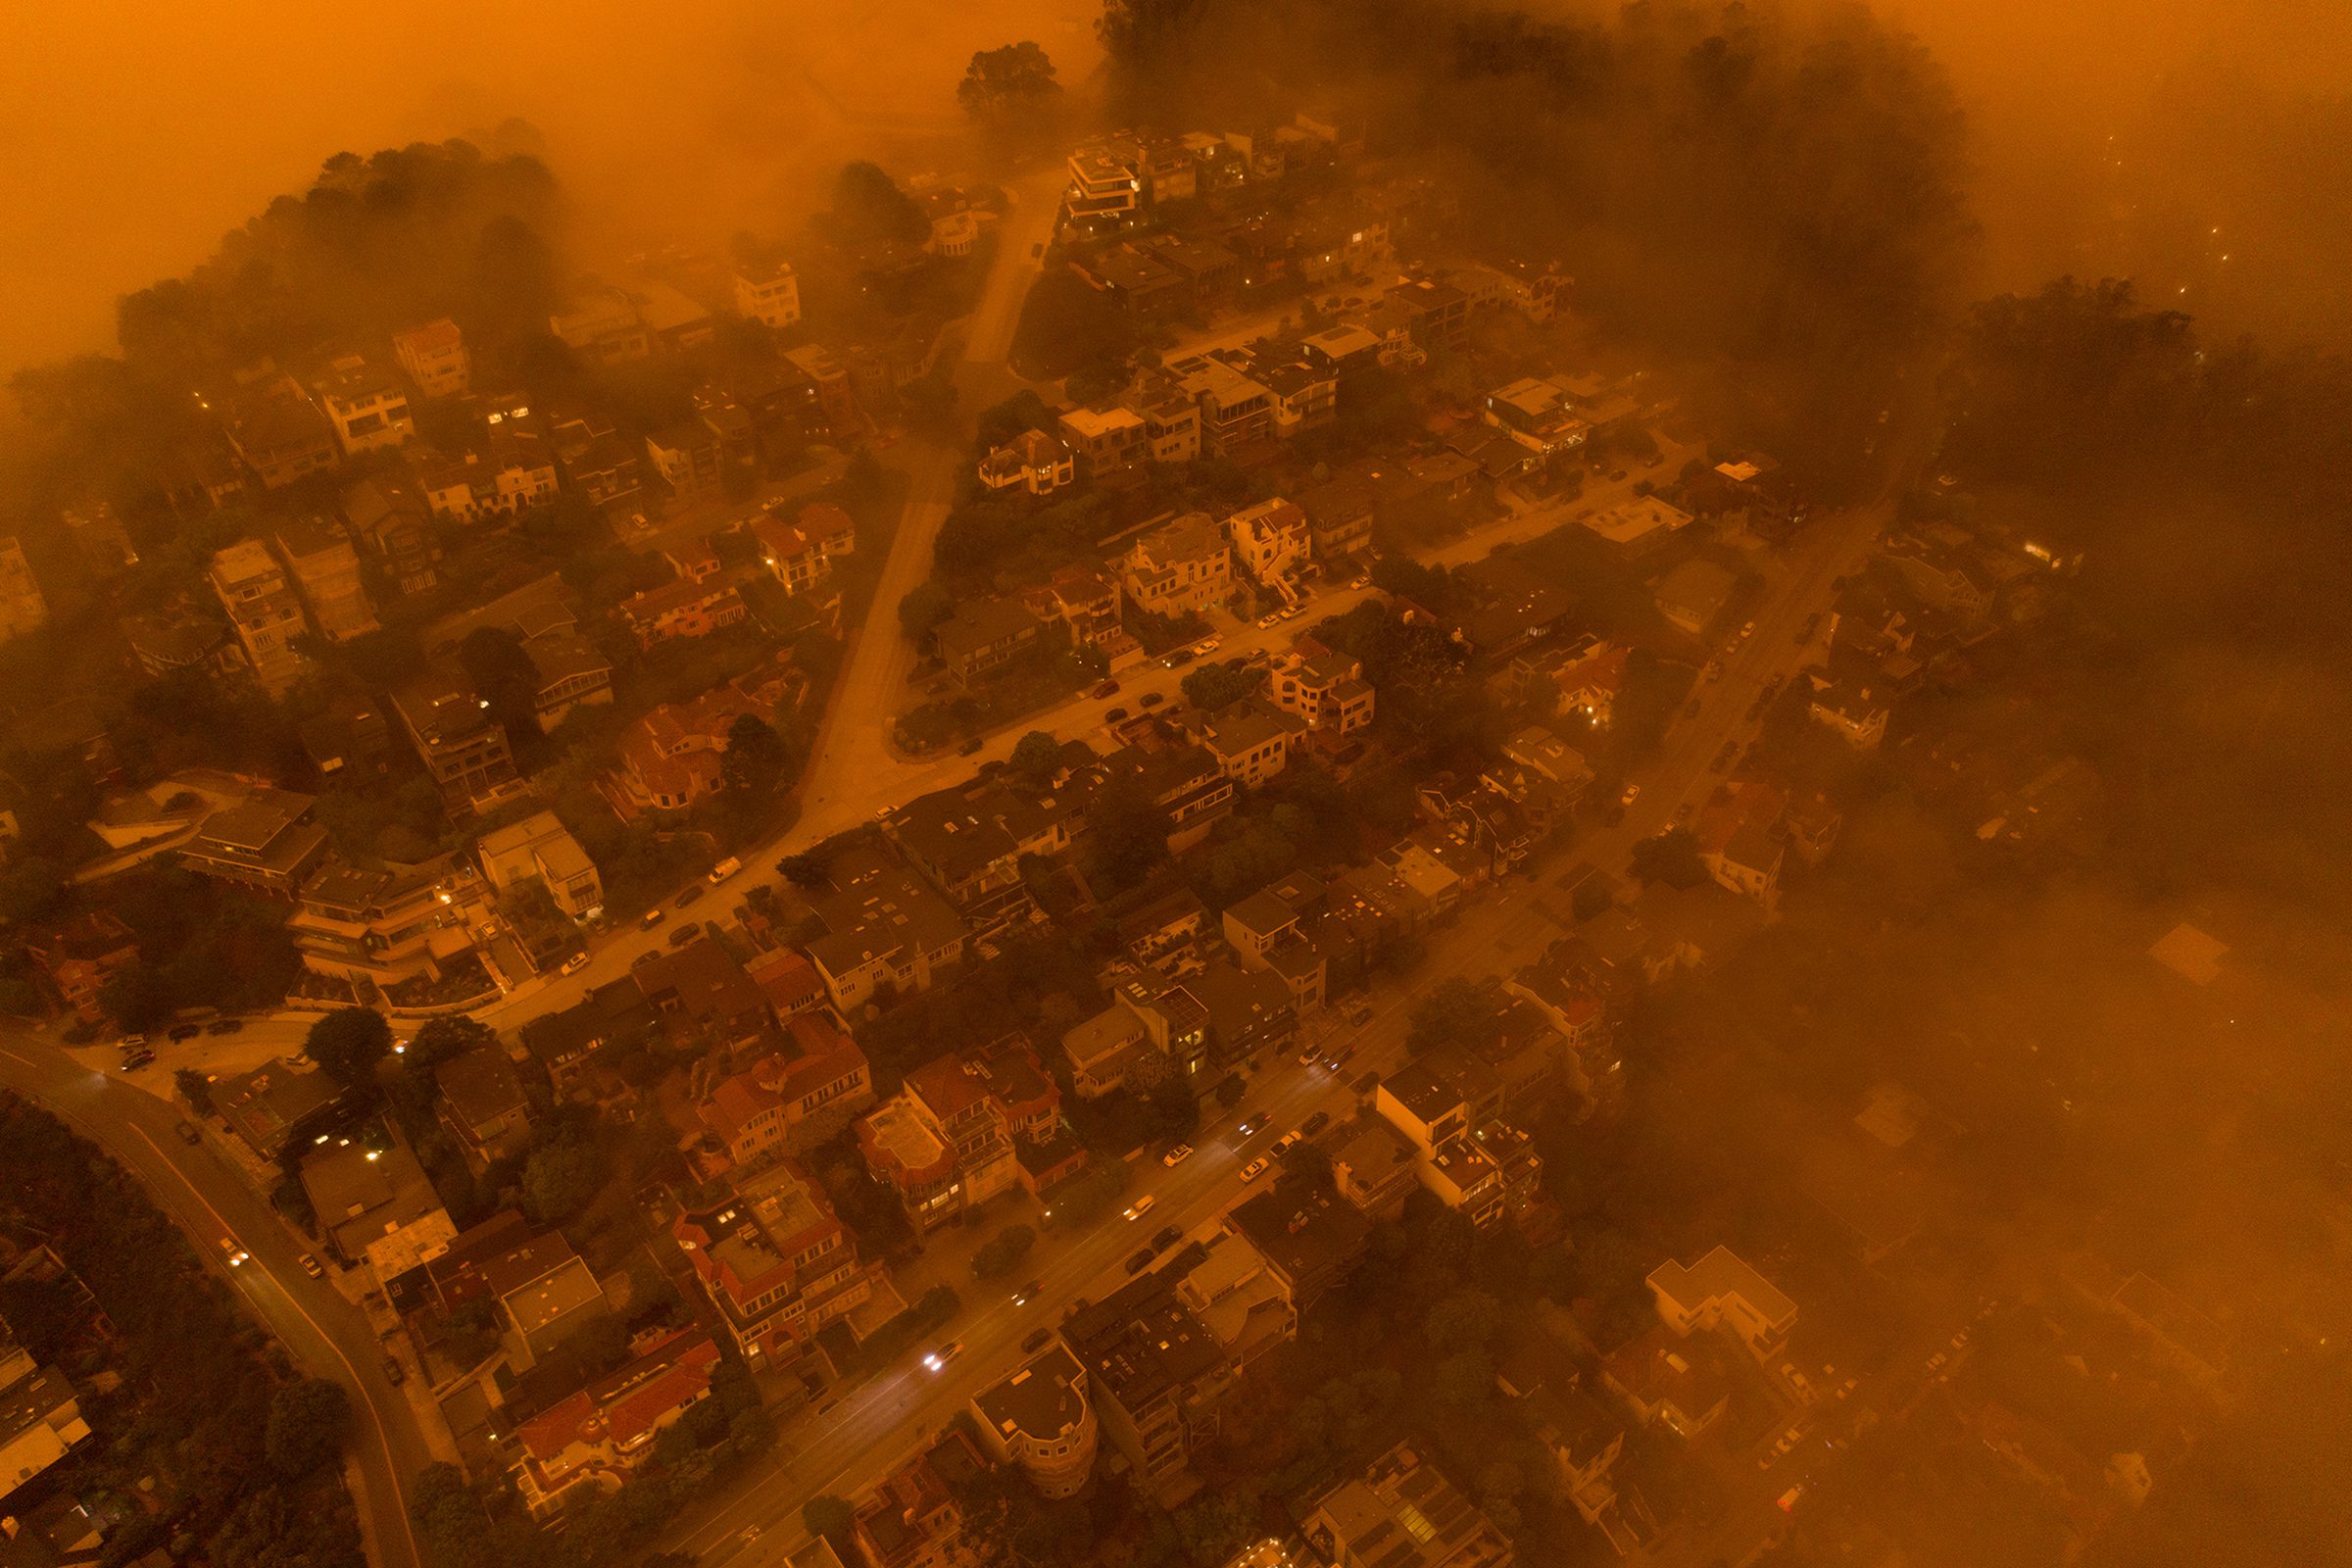 Nearby wildfires blanketed San Francisco with smoke and turned skies orange during the 2020 fire season. Verge video director Vjeran Pavic took these pictures of San Francisco and Sutro Tower using a drone on September 9th, 2020.